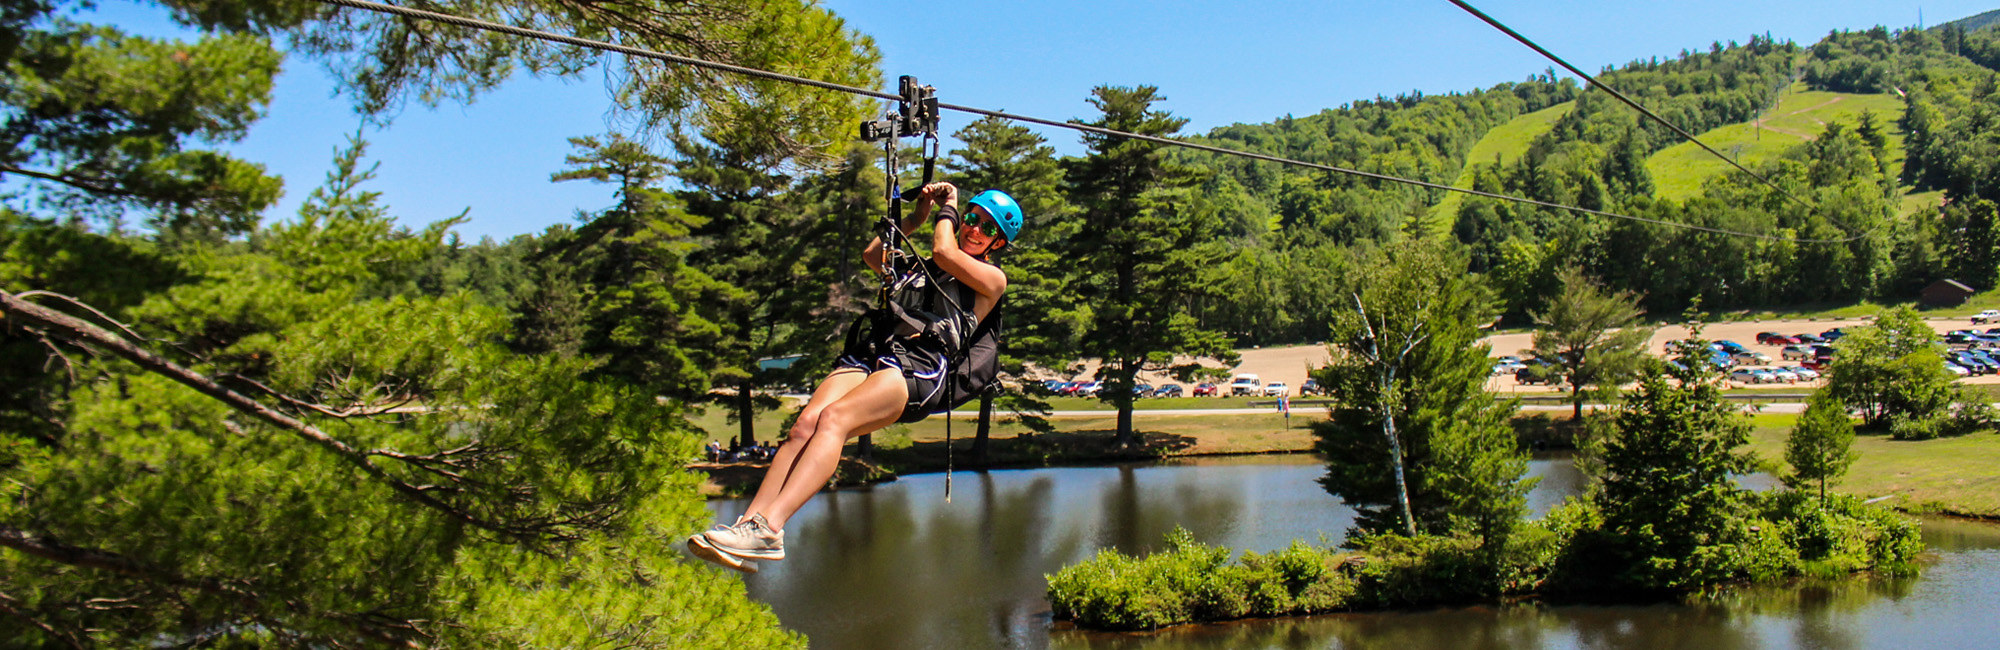 woman ziplining over the pond